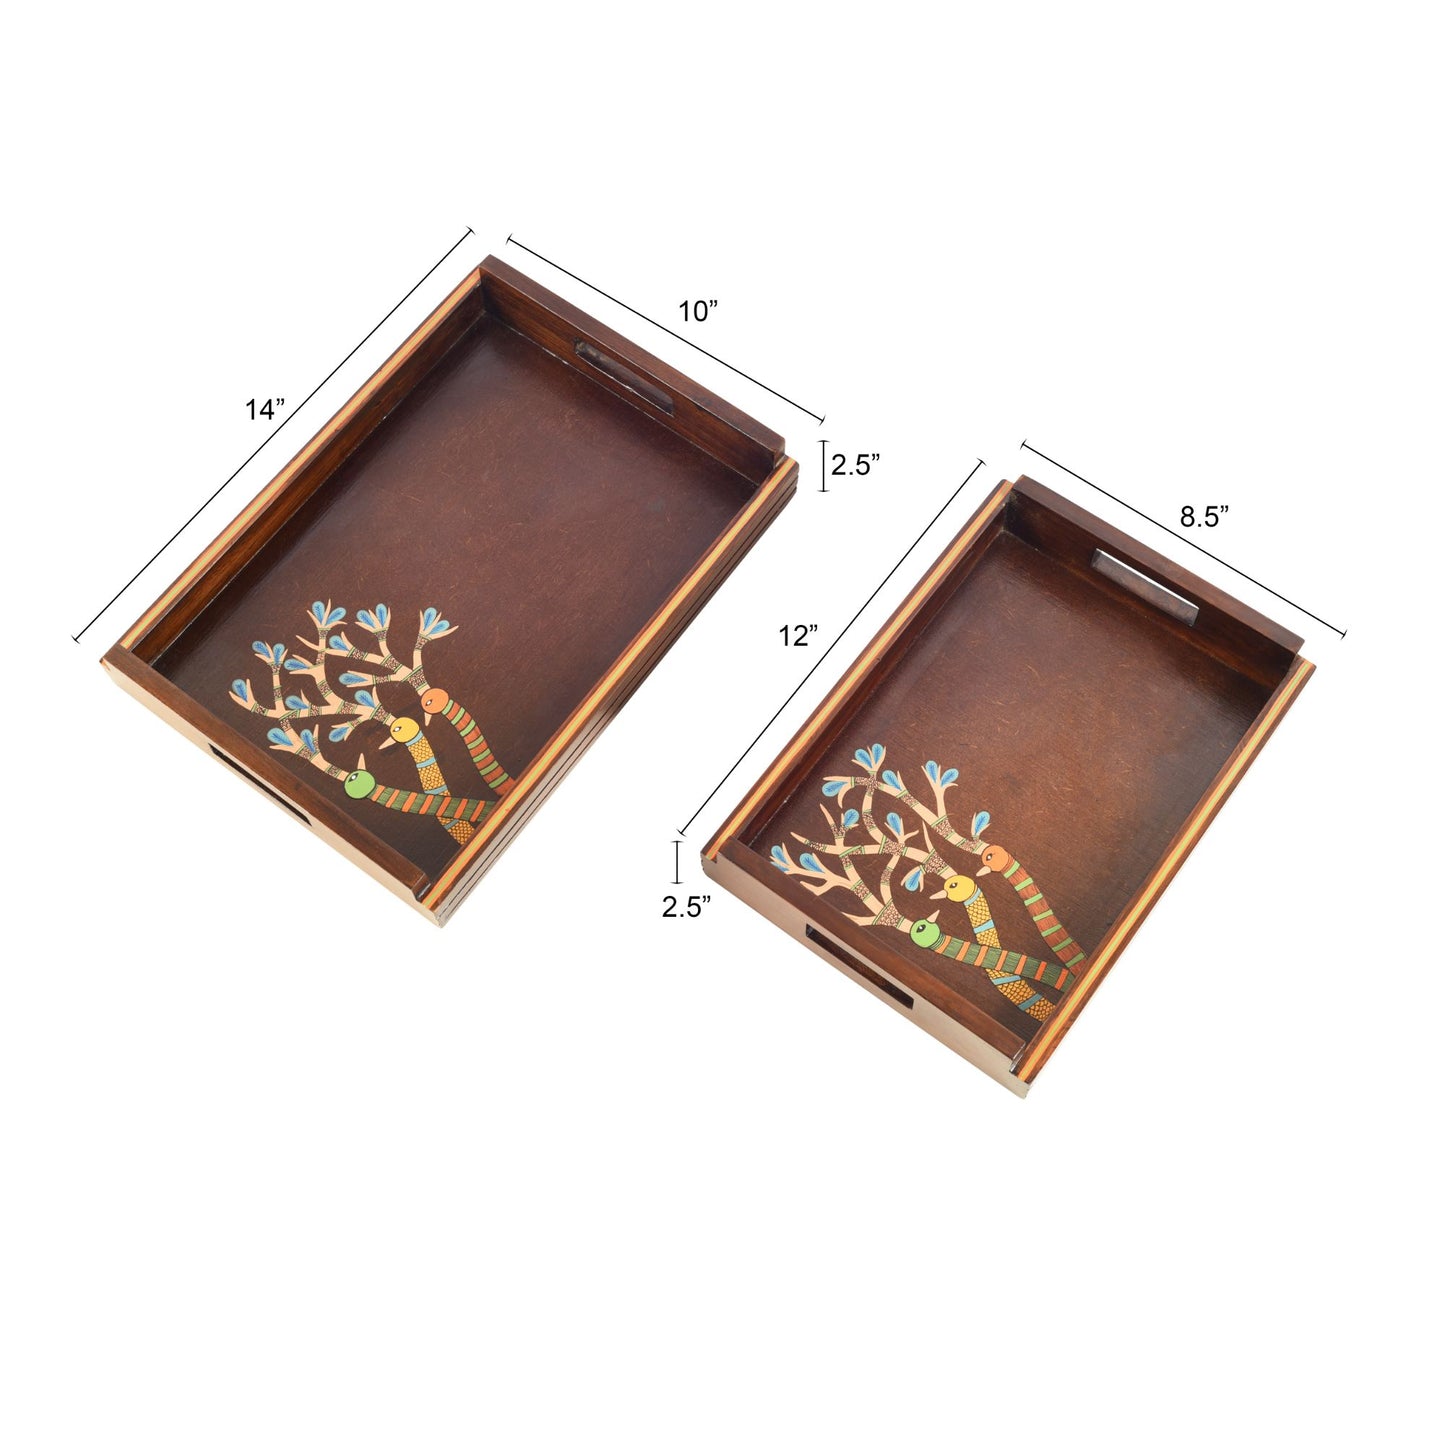 Chriping Birds Handcrafted Serving Tray (Set of 2)